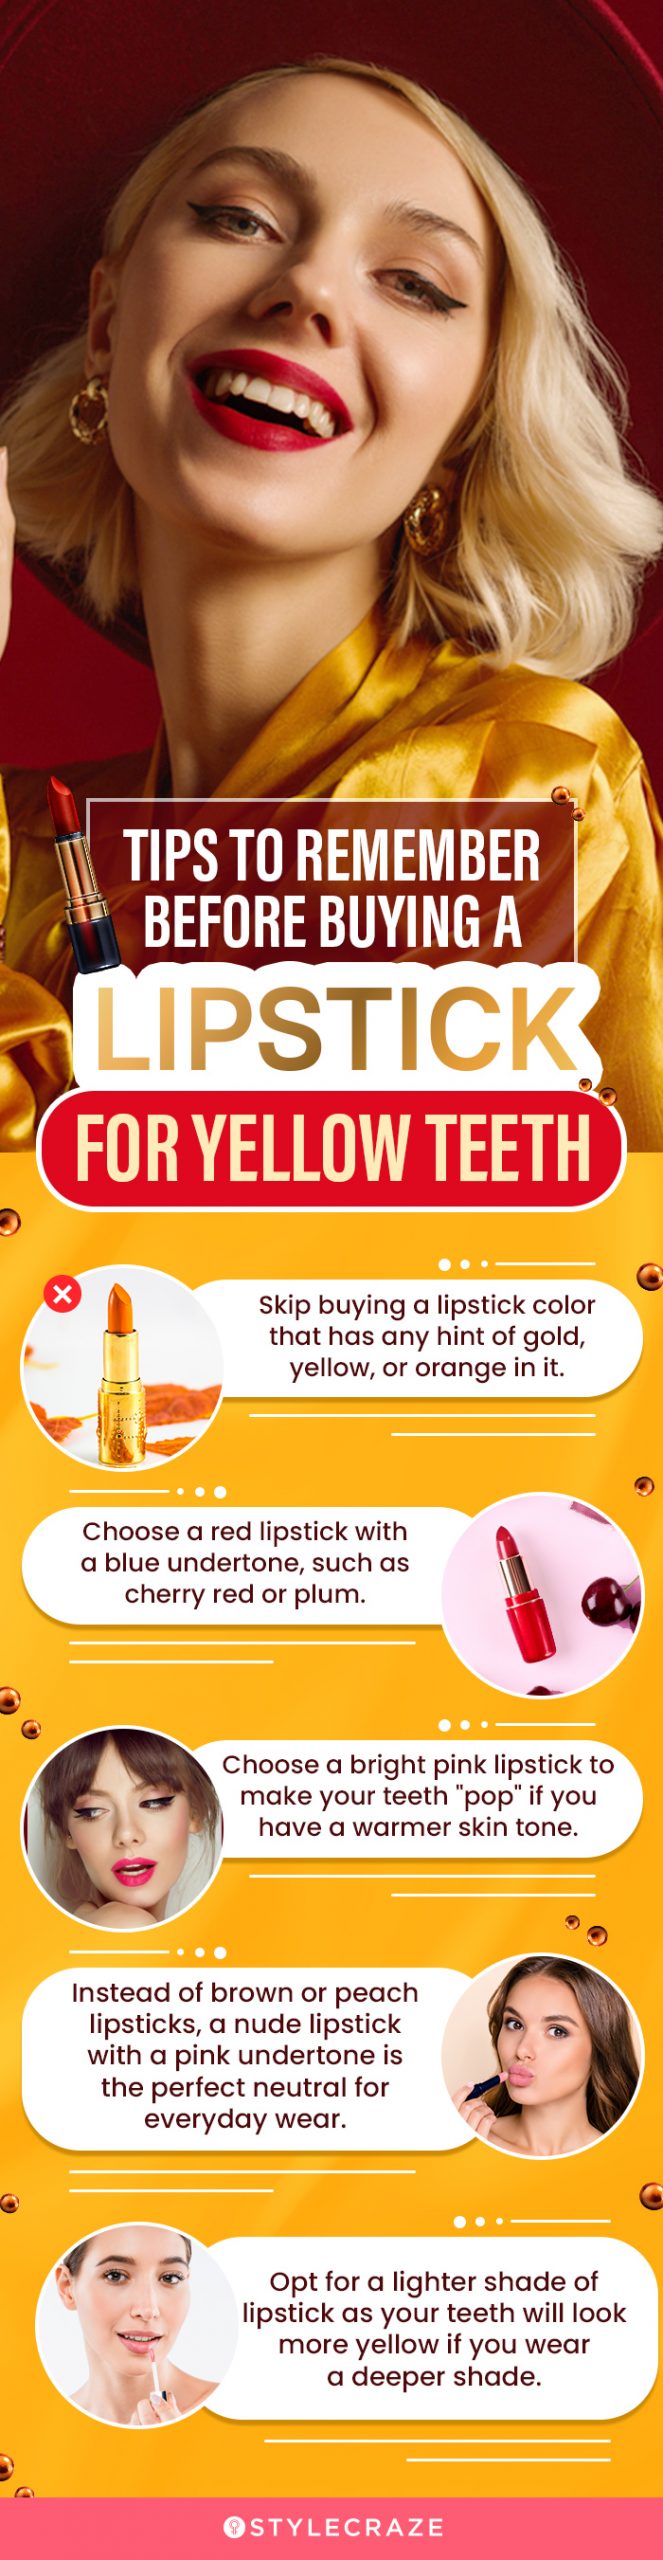 Tips To Remember Before Buying A Lipstick For Yellow Teeth (infographic)